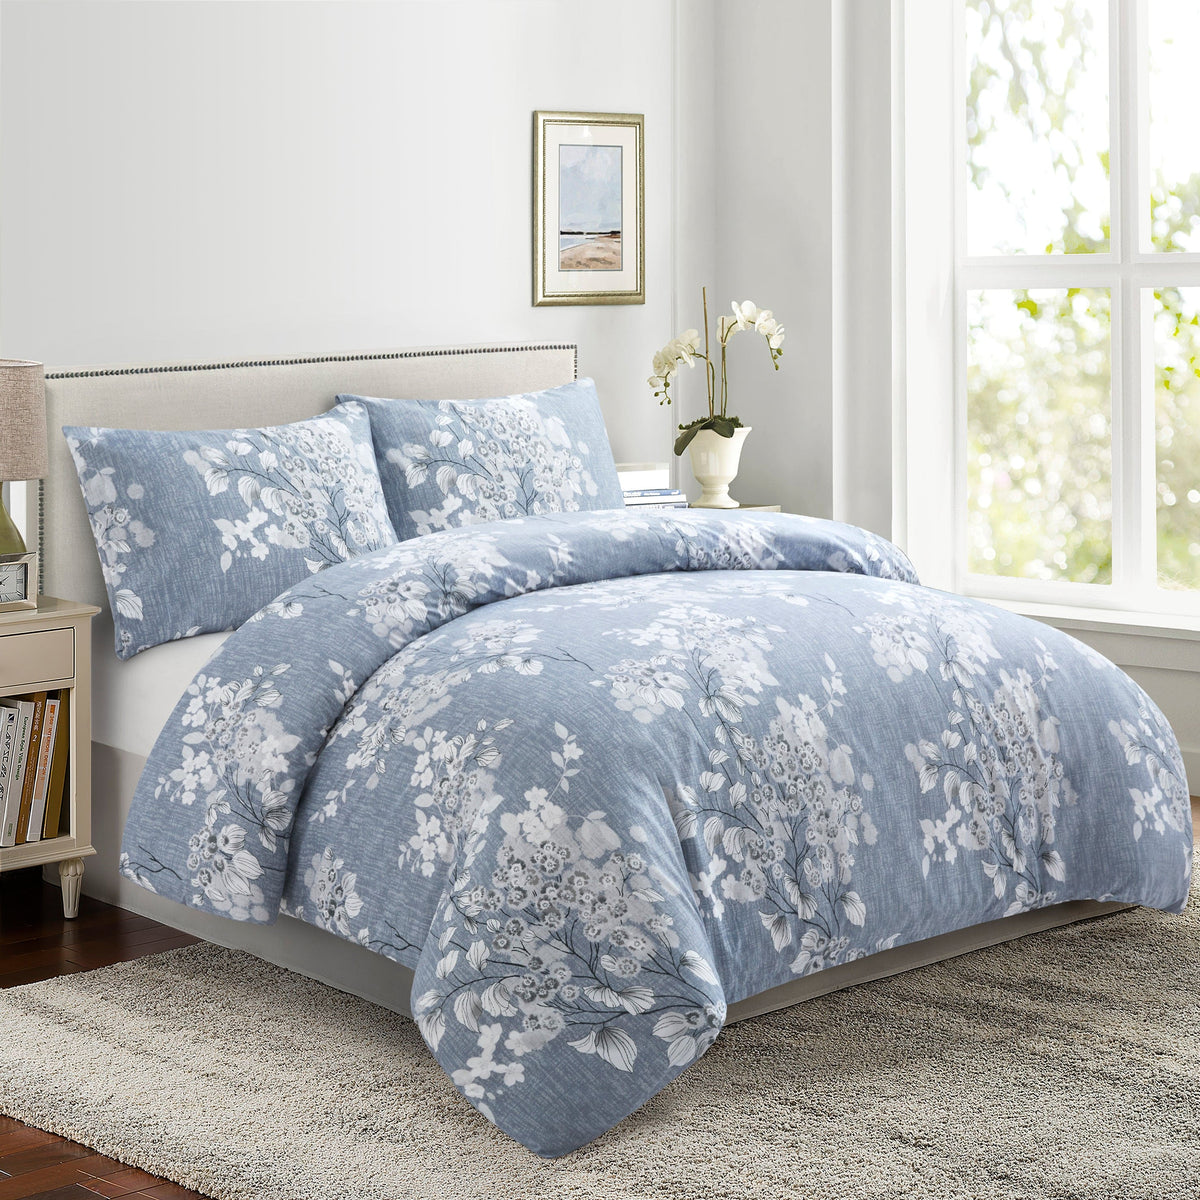 Soft Silky Printed Rayon from Bamboo All Season Duvet Cover Fitted Sheet Ensemble Bedding Set, Romantic Inkwash Floral Pattern